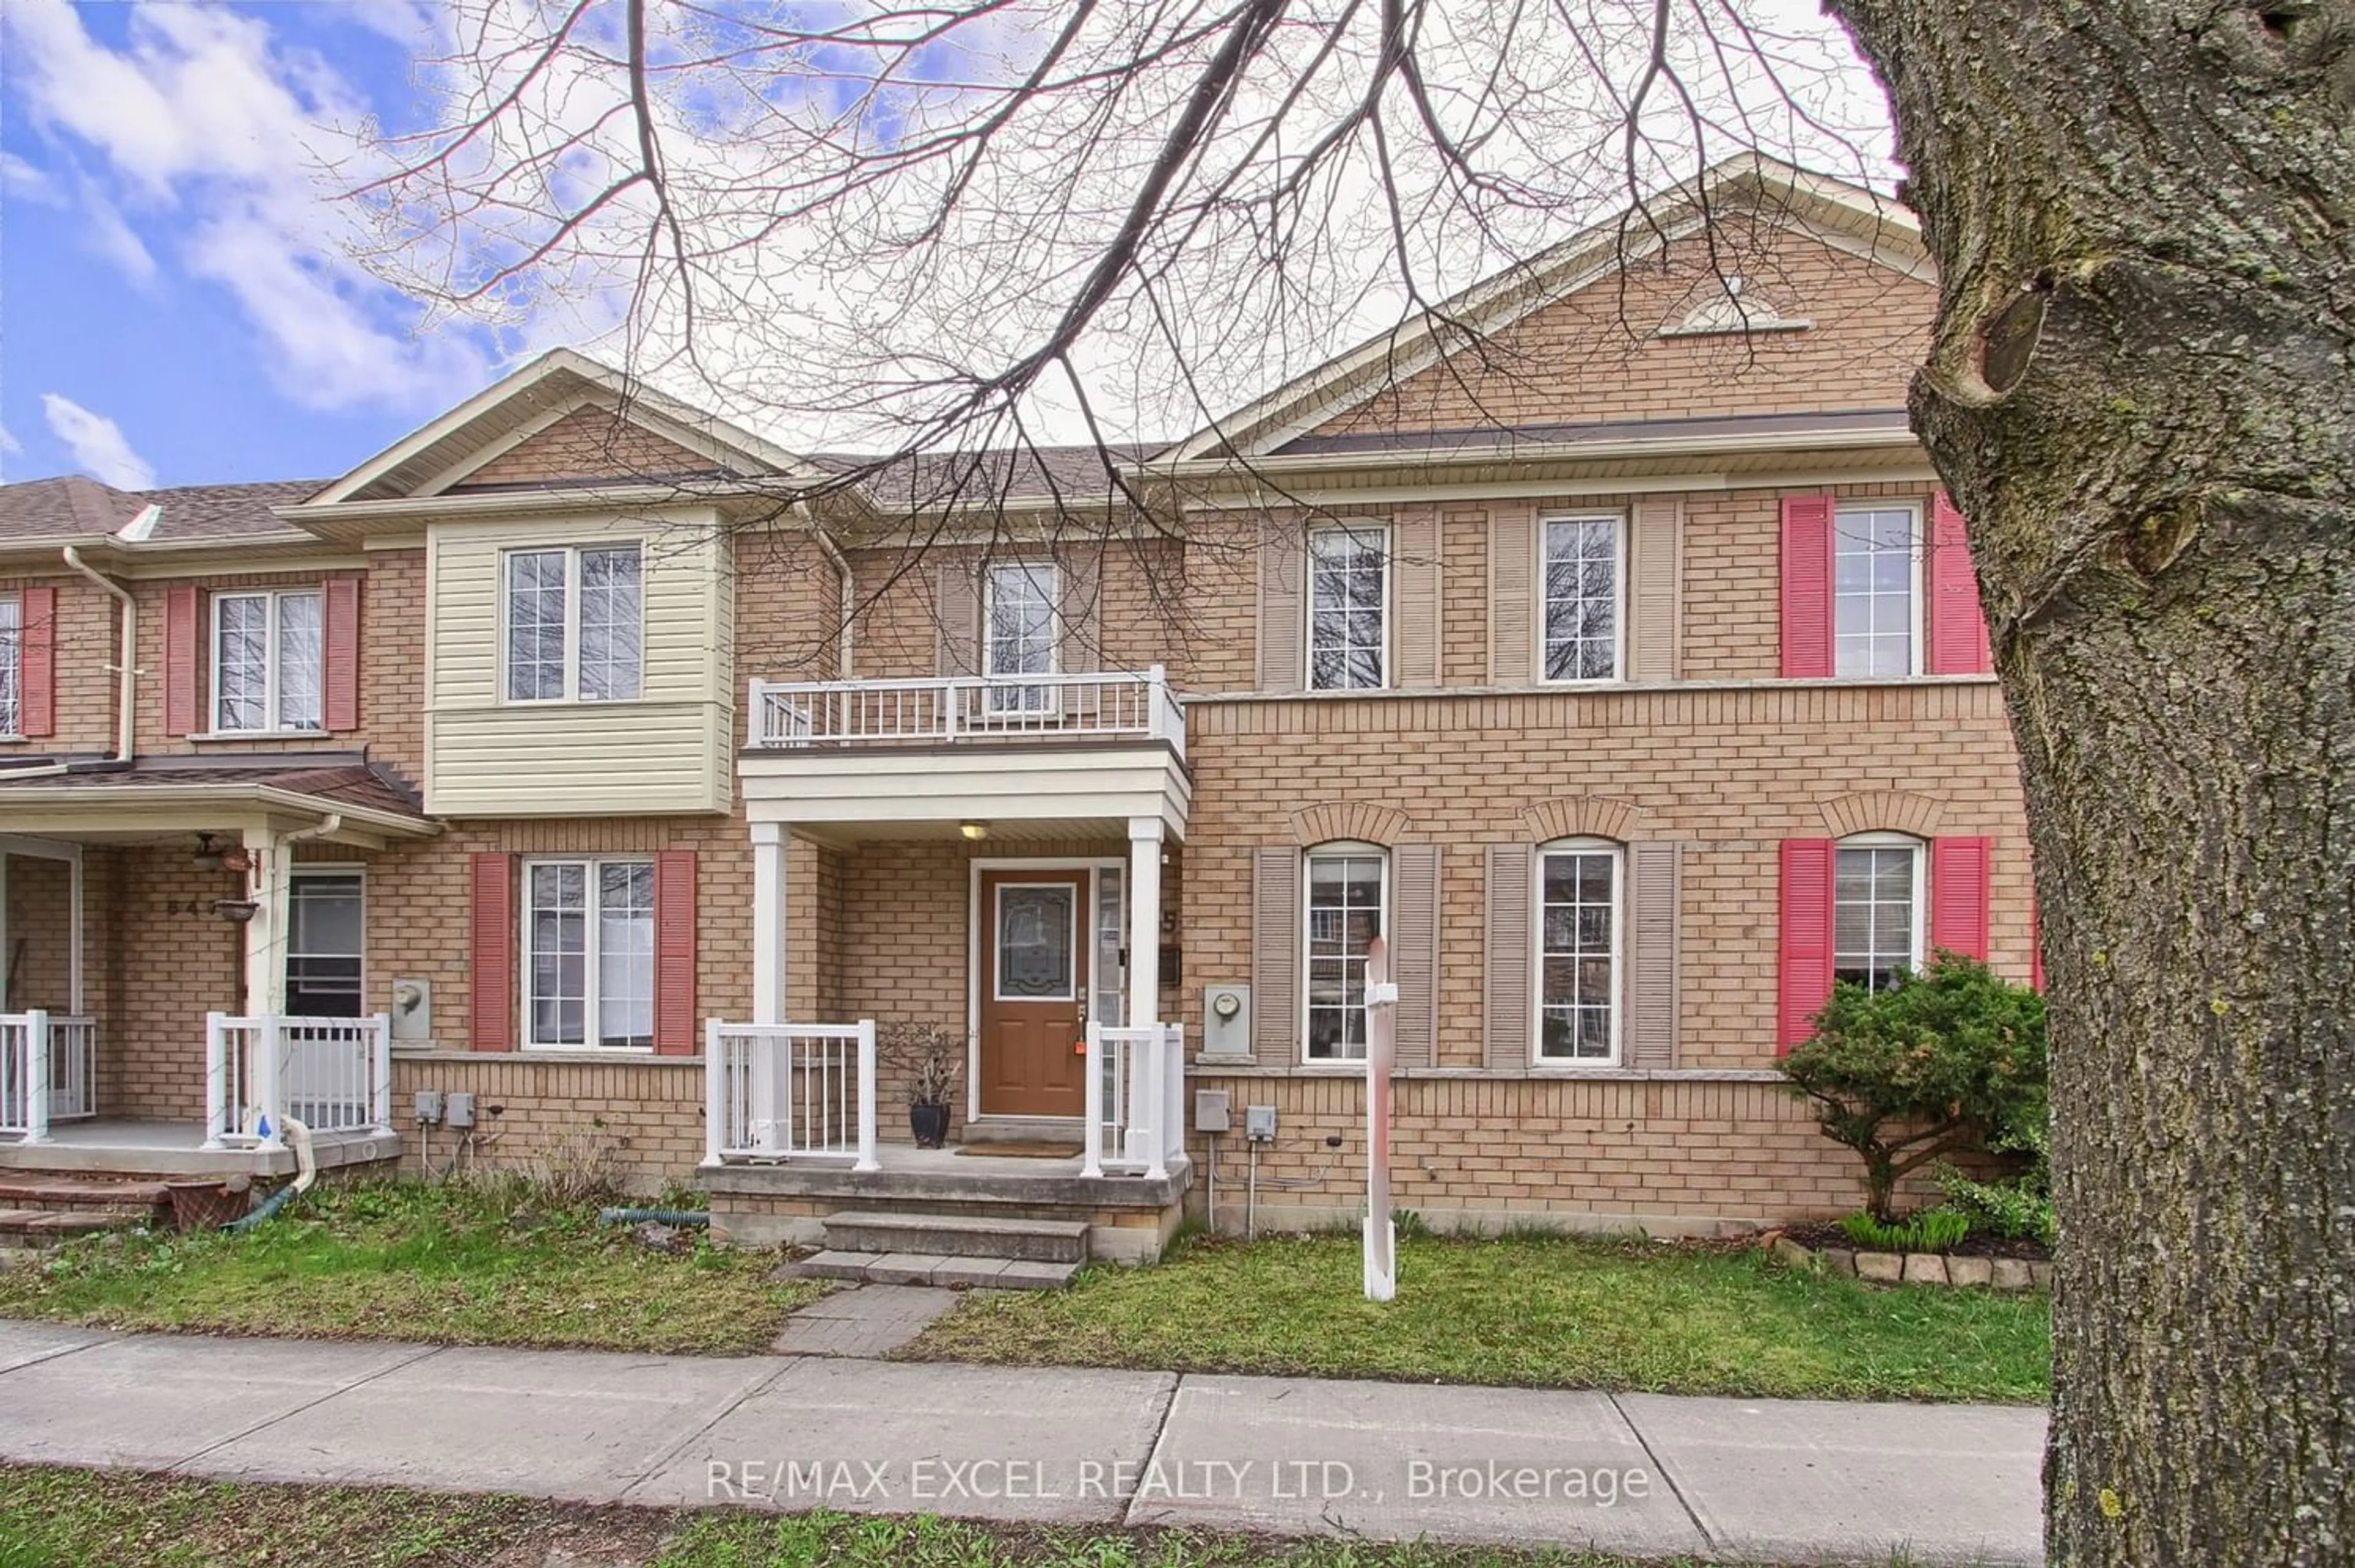 A pic from exterior of the house or condo for 645 South Unionville Ave, Markham Ontario L3R 4W6